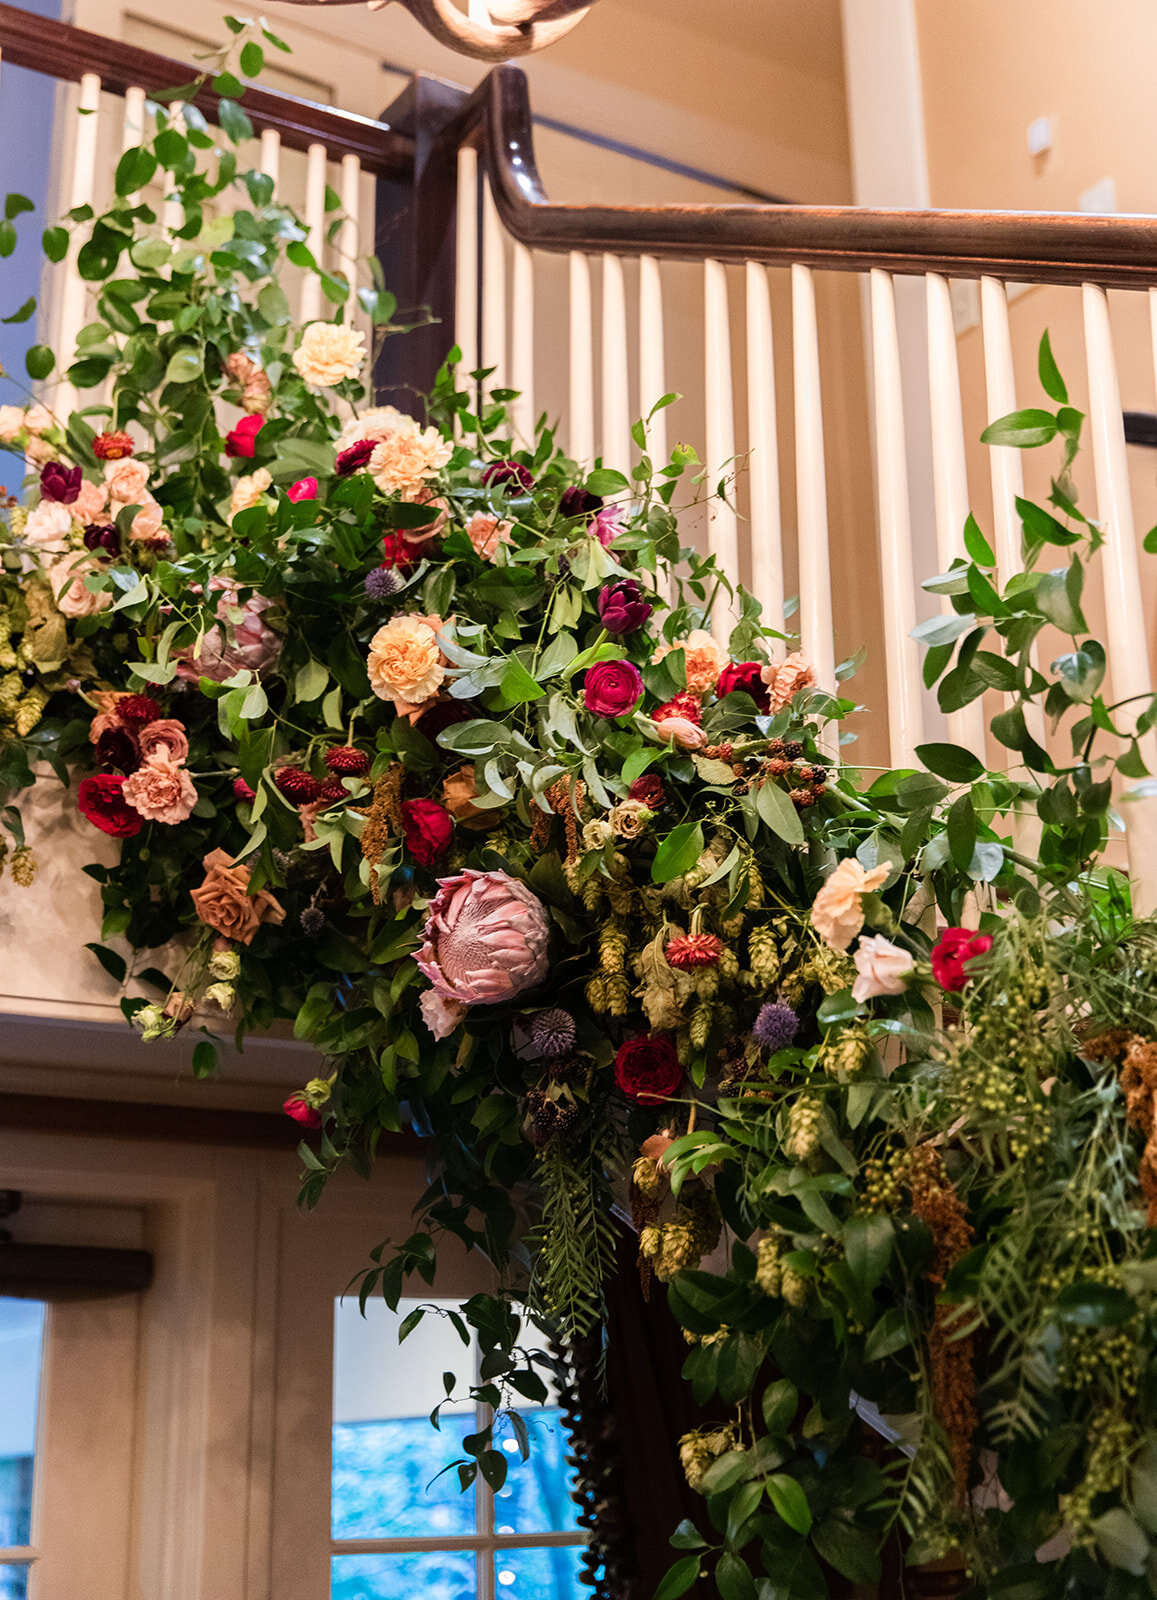 Early fall wedding floral design at RT Lodge. Lush, untamed installation growing up the staircase with wildflowers, protea, fruiting branches, ranunculus, garden roses, and dried textures.